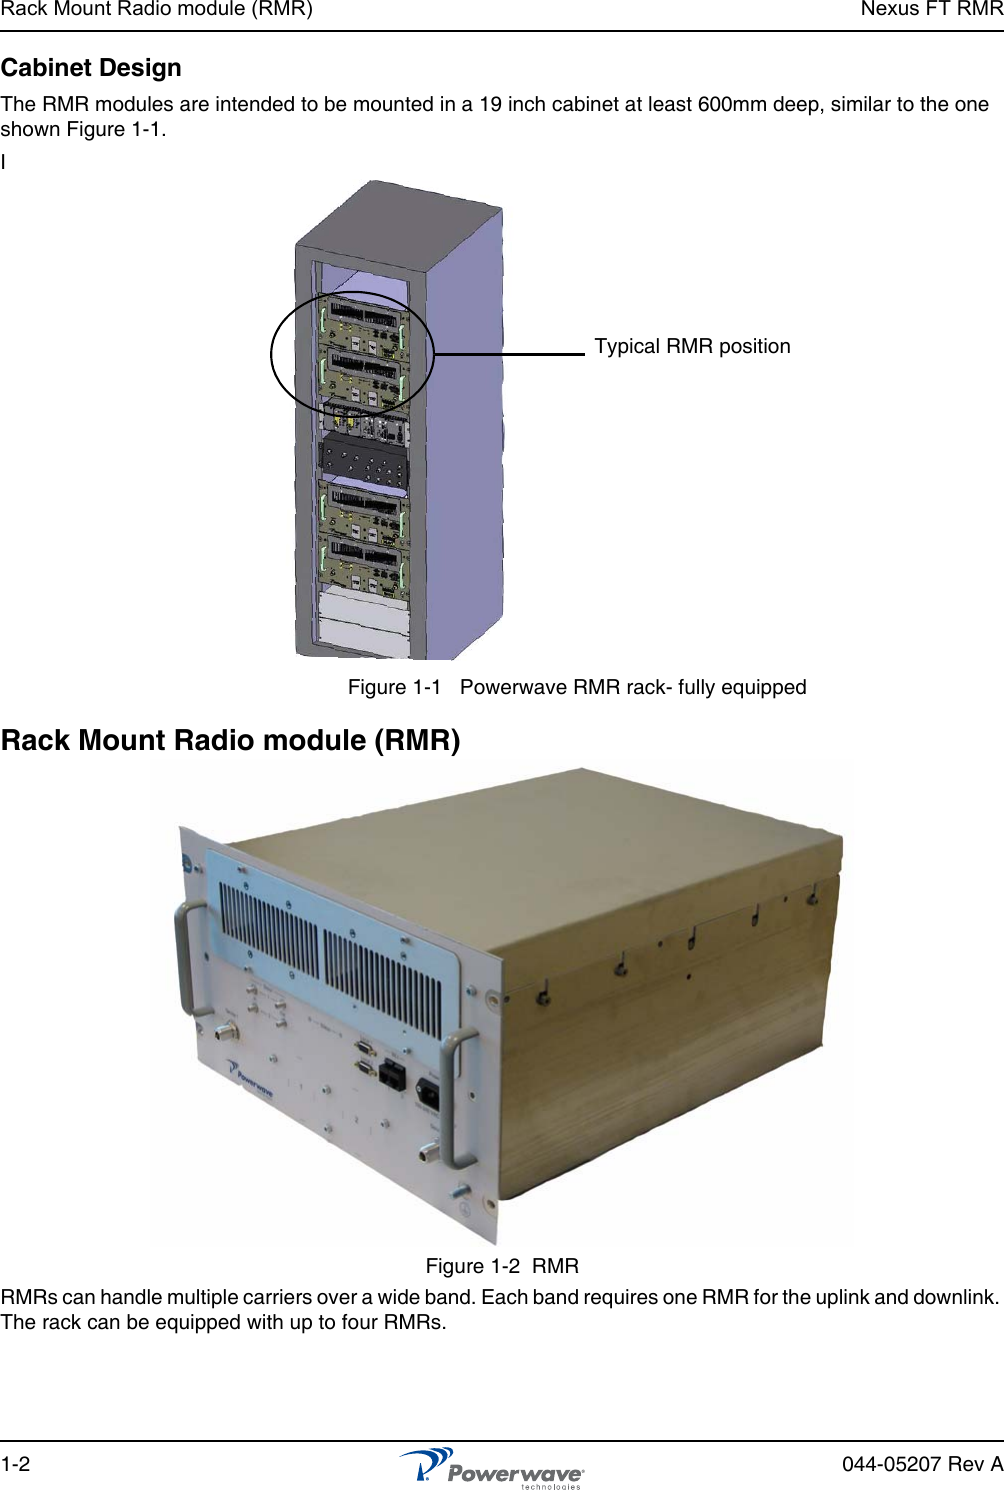 Rack Mount Radio module (RMR) Nexus FT RMR1-2 044-05207 Rev ACabinet DesignThe RMR modules are intended to be mounted in a 19 inch cabinet at least 600mm deep, similar to the one shown Figure 1-1.IFigure 1-1   Powerwave RMR rack- fully equippedRack Mount Radio module (RMR)Figure 1-2  RMR RMRs can handle multiple carriers over a wide band. Each band requires one RMR for the uplink and downlink. The rack can be equipped with up to four RMRs.Typical RMR position